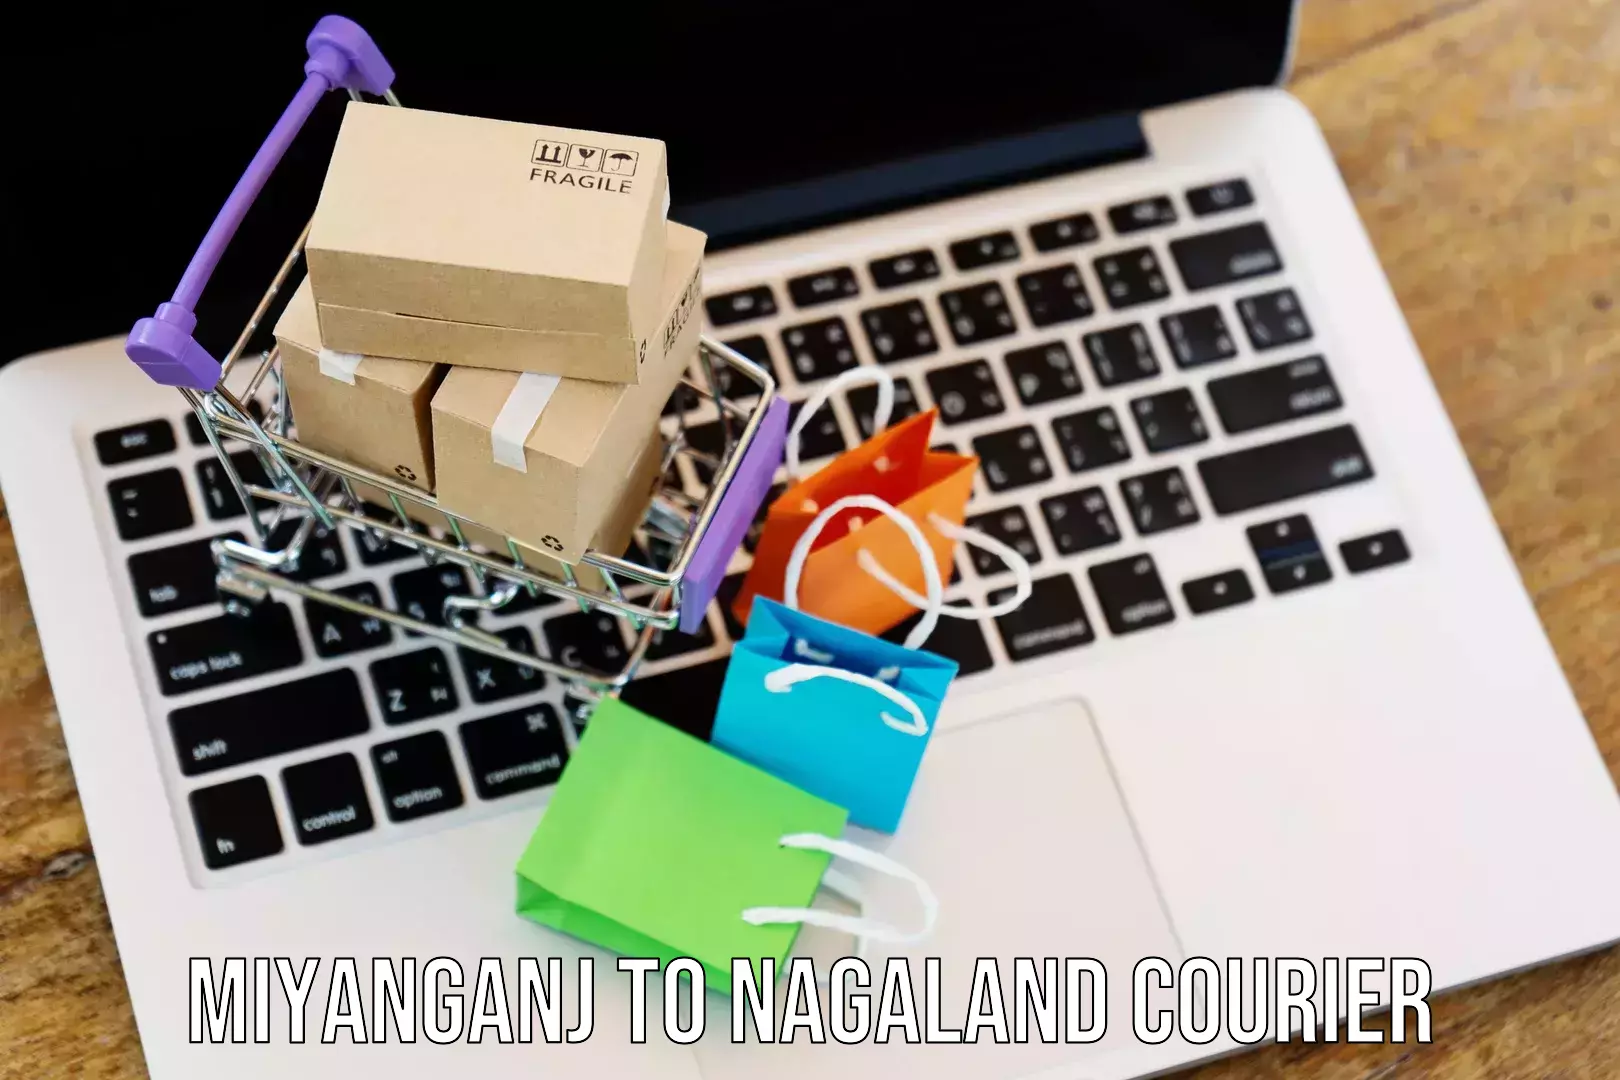 Corporate courier solutions in Miyanganj to Nagaland